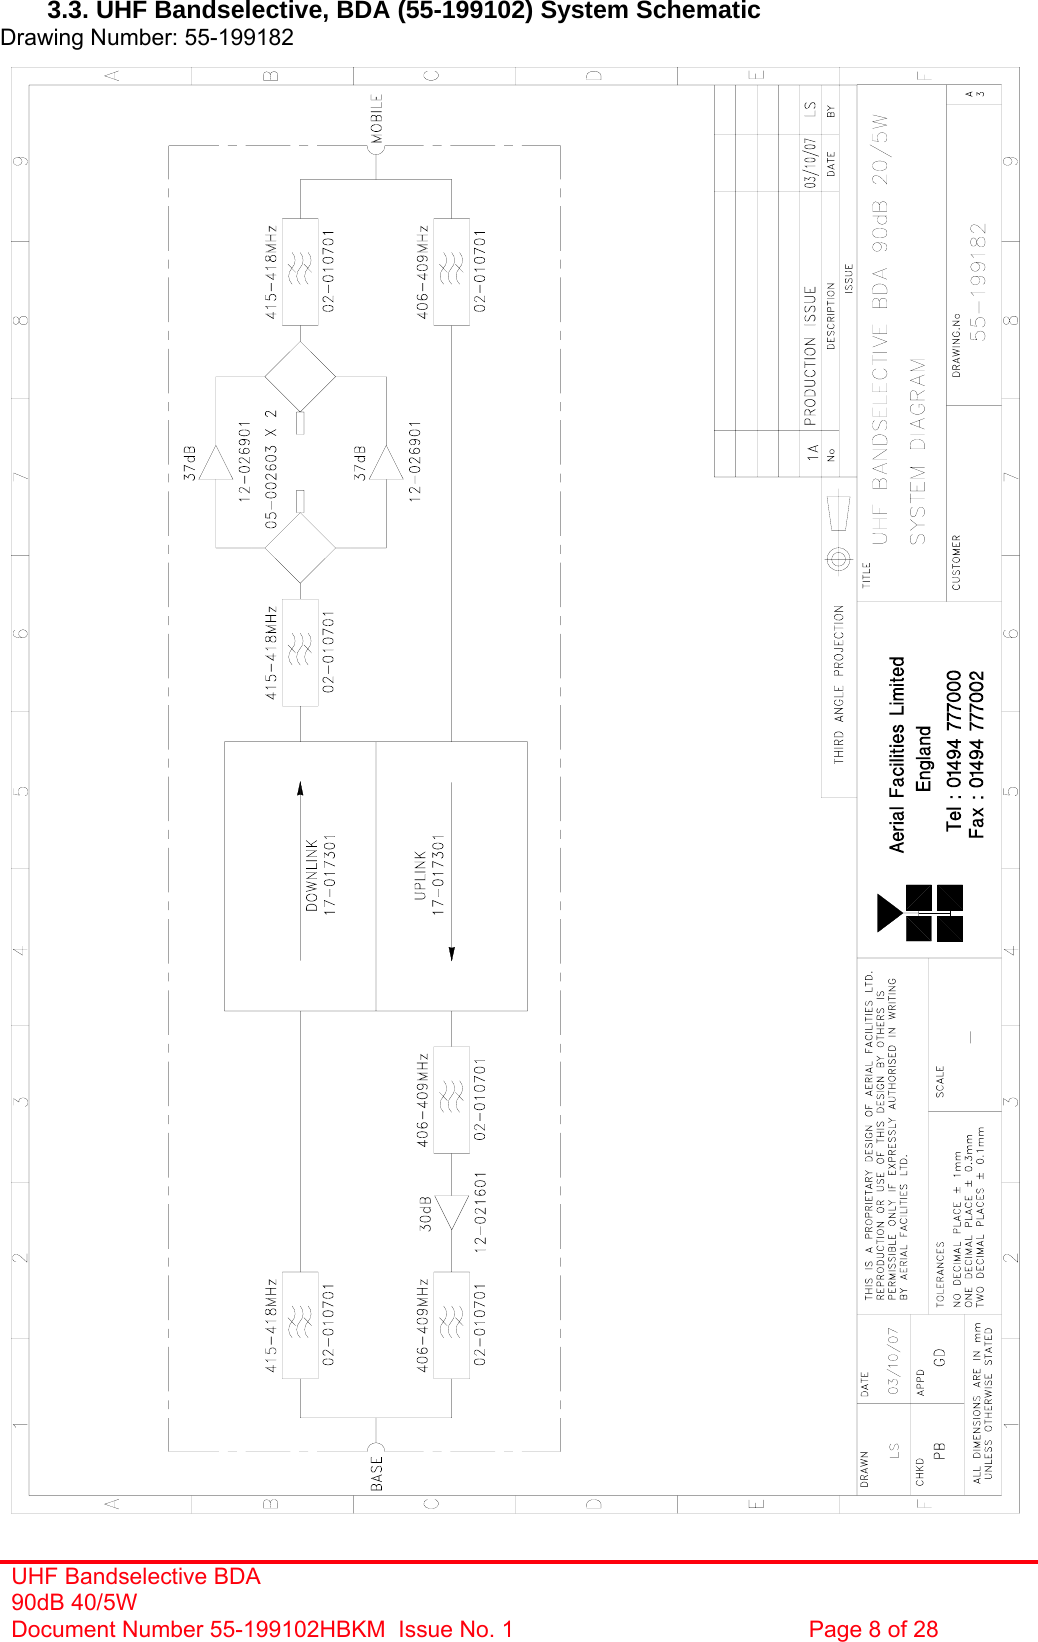  3.3. UHF Bandselective, BDA (55-199102) System Schematic  Drawing Number: 55-199182                                                 UHF Bandselective BDA 90dB 40/5W Document Number 55-199102HBKM  Issue No. 1  Page 8 of 28  